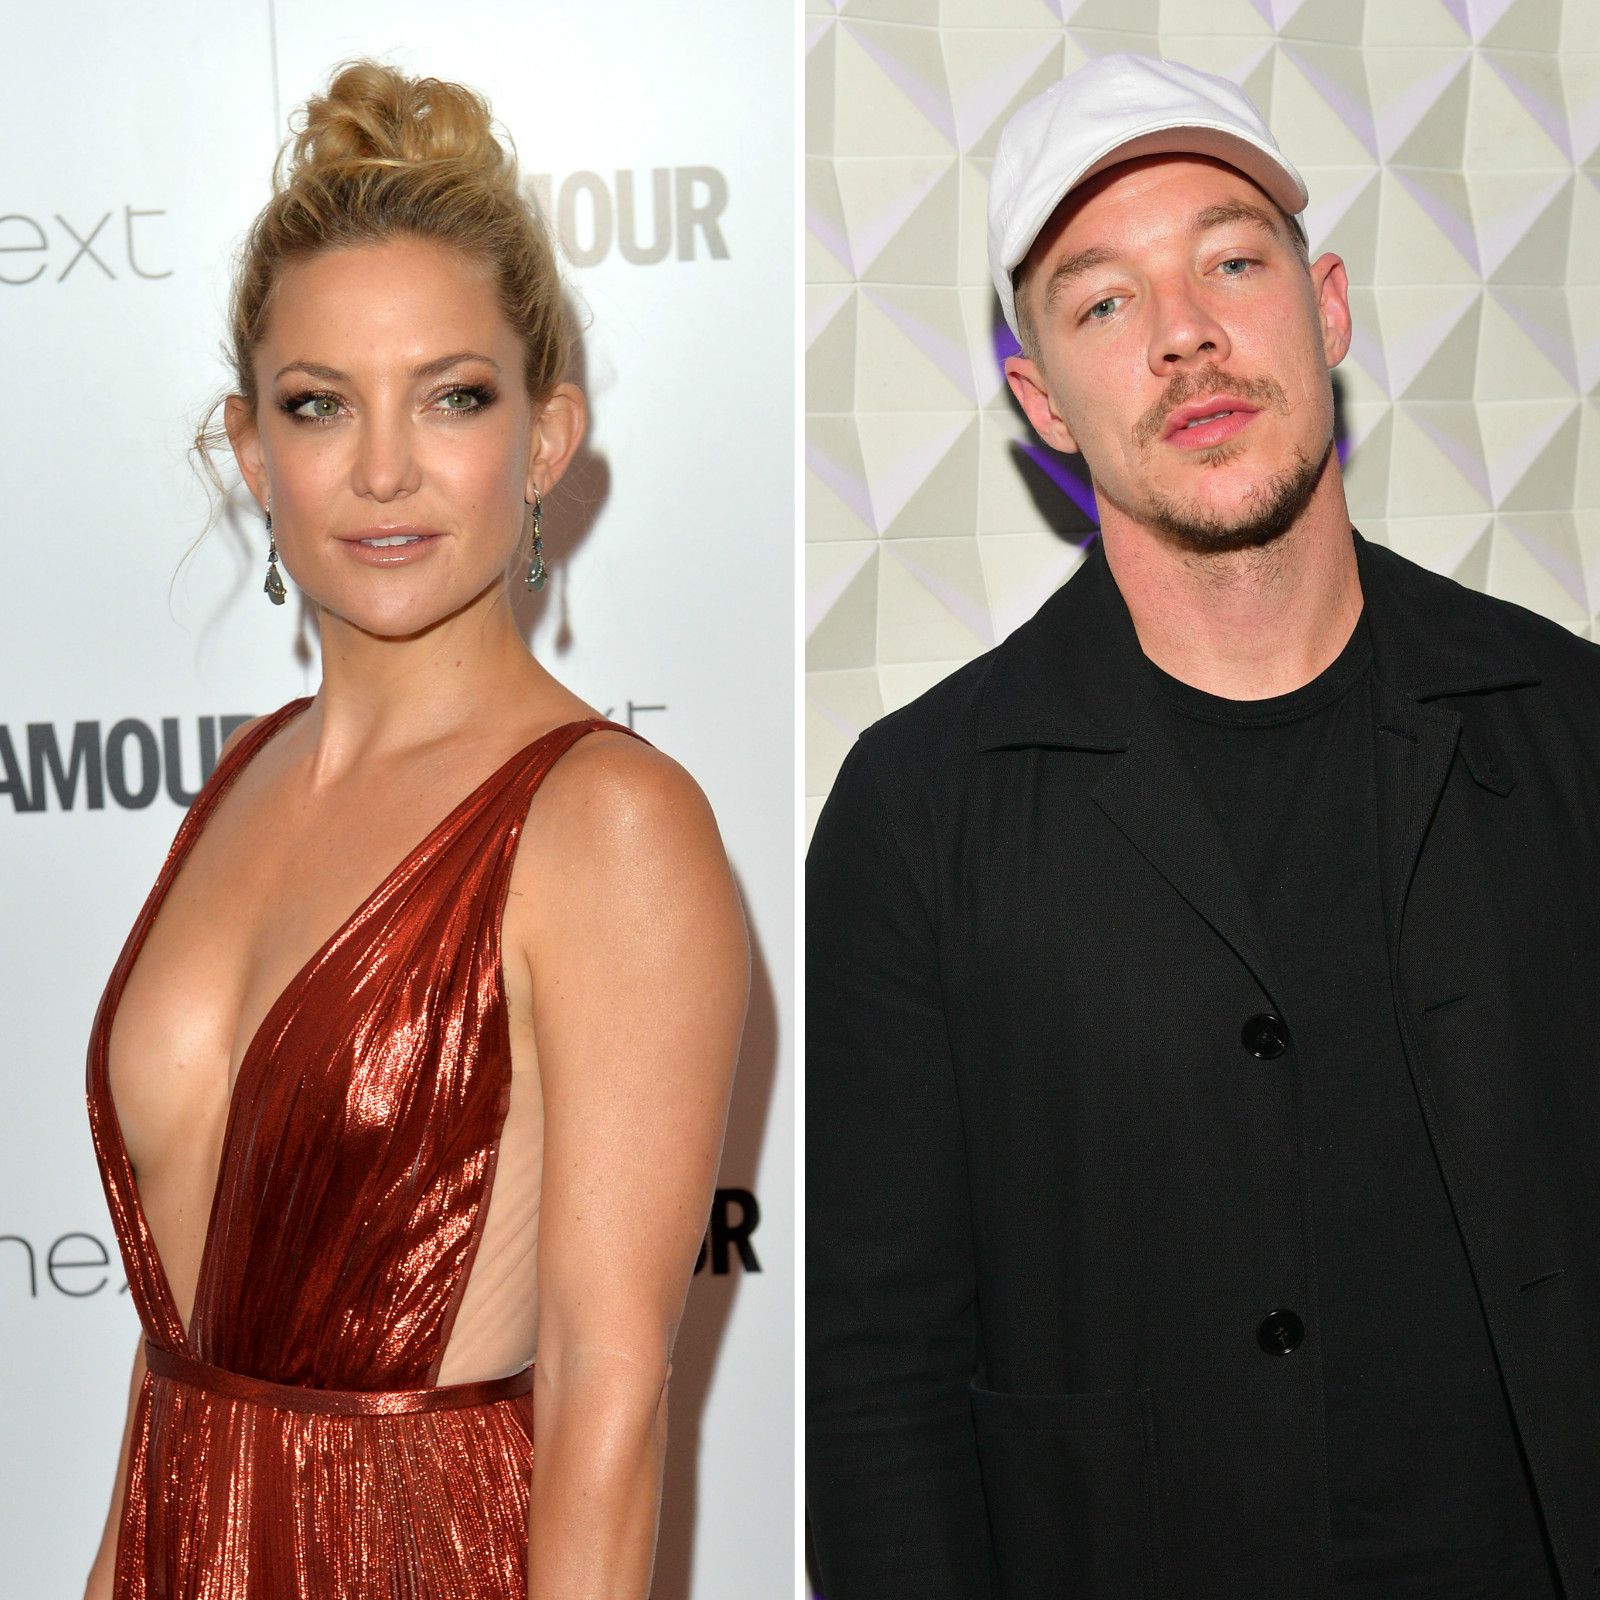 Diplo who dating is Who Is